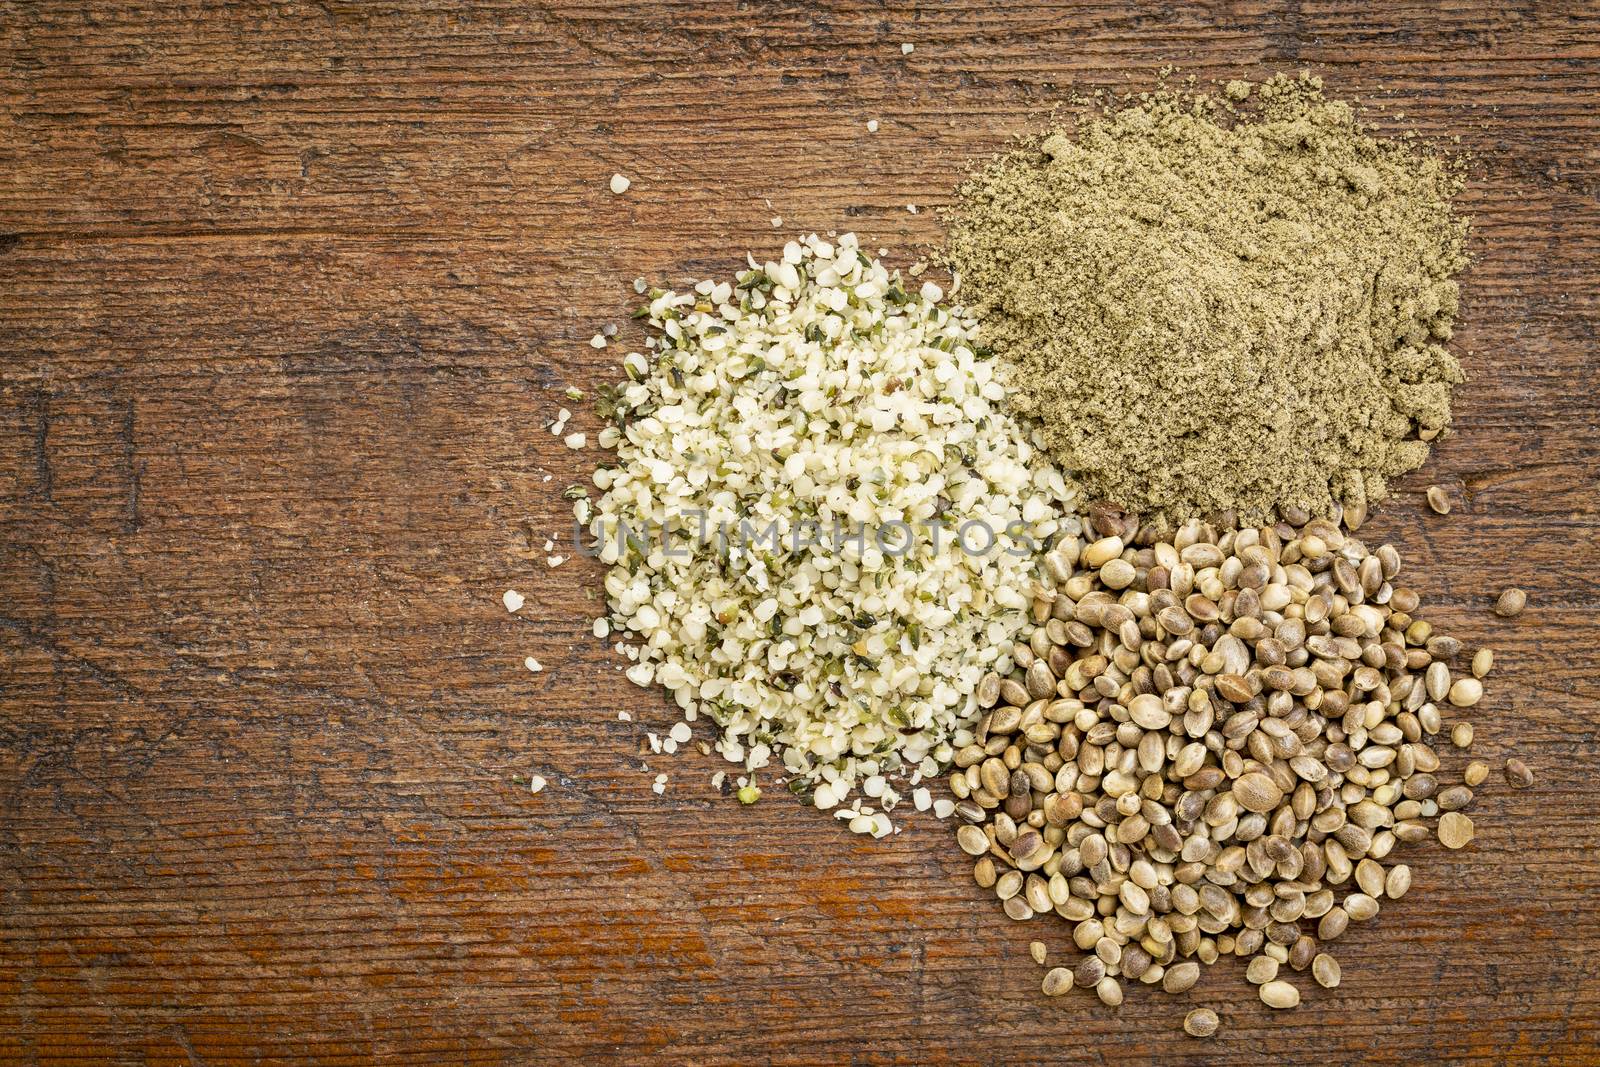 hemp seed and protein powder by PixelsAway